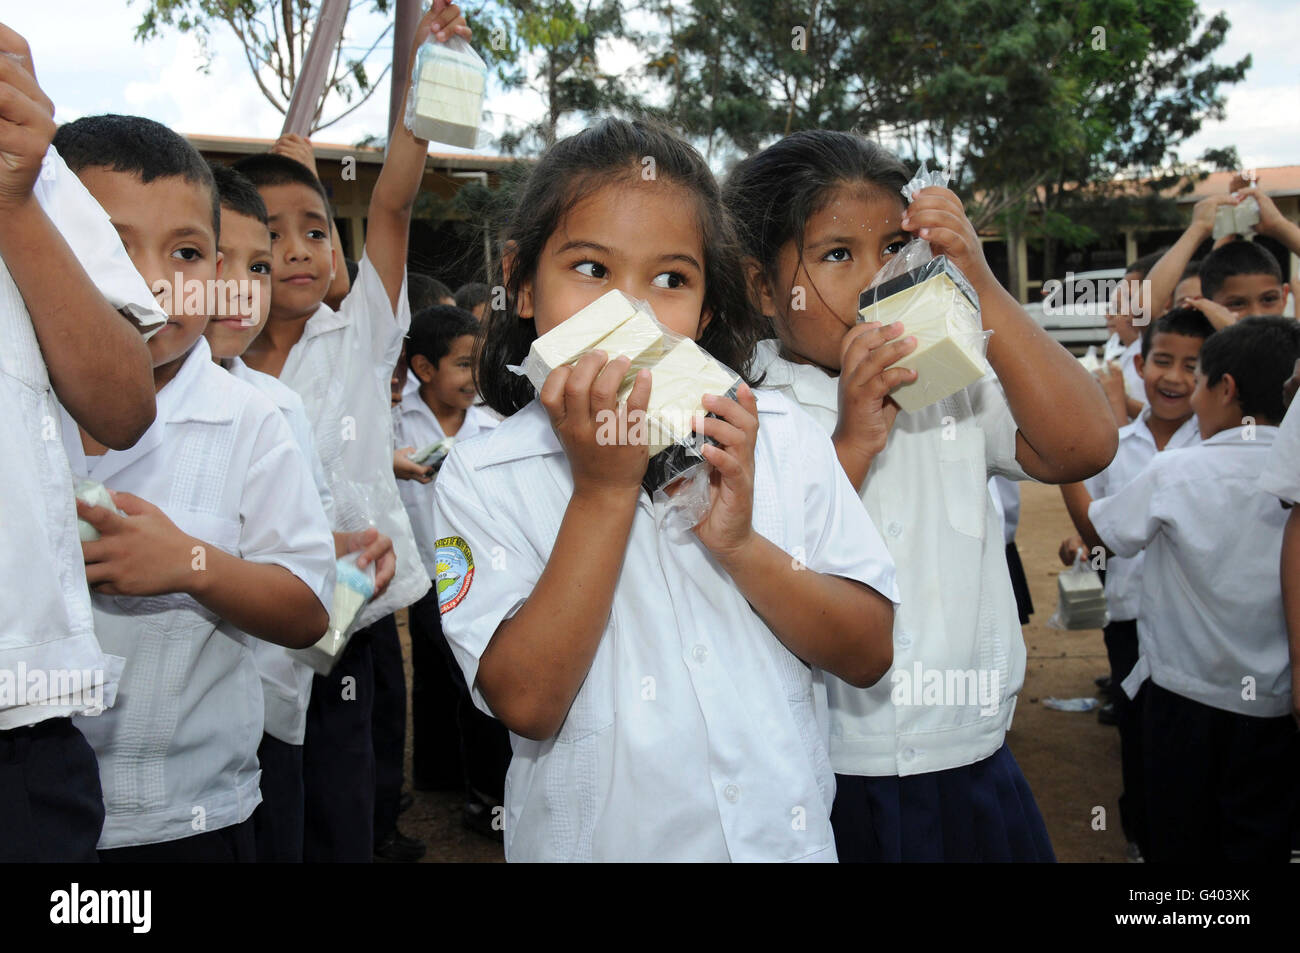 Students enjoy the scent of soap received from humanitarian aid in Tegucigalpa. Stock Photo